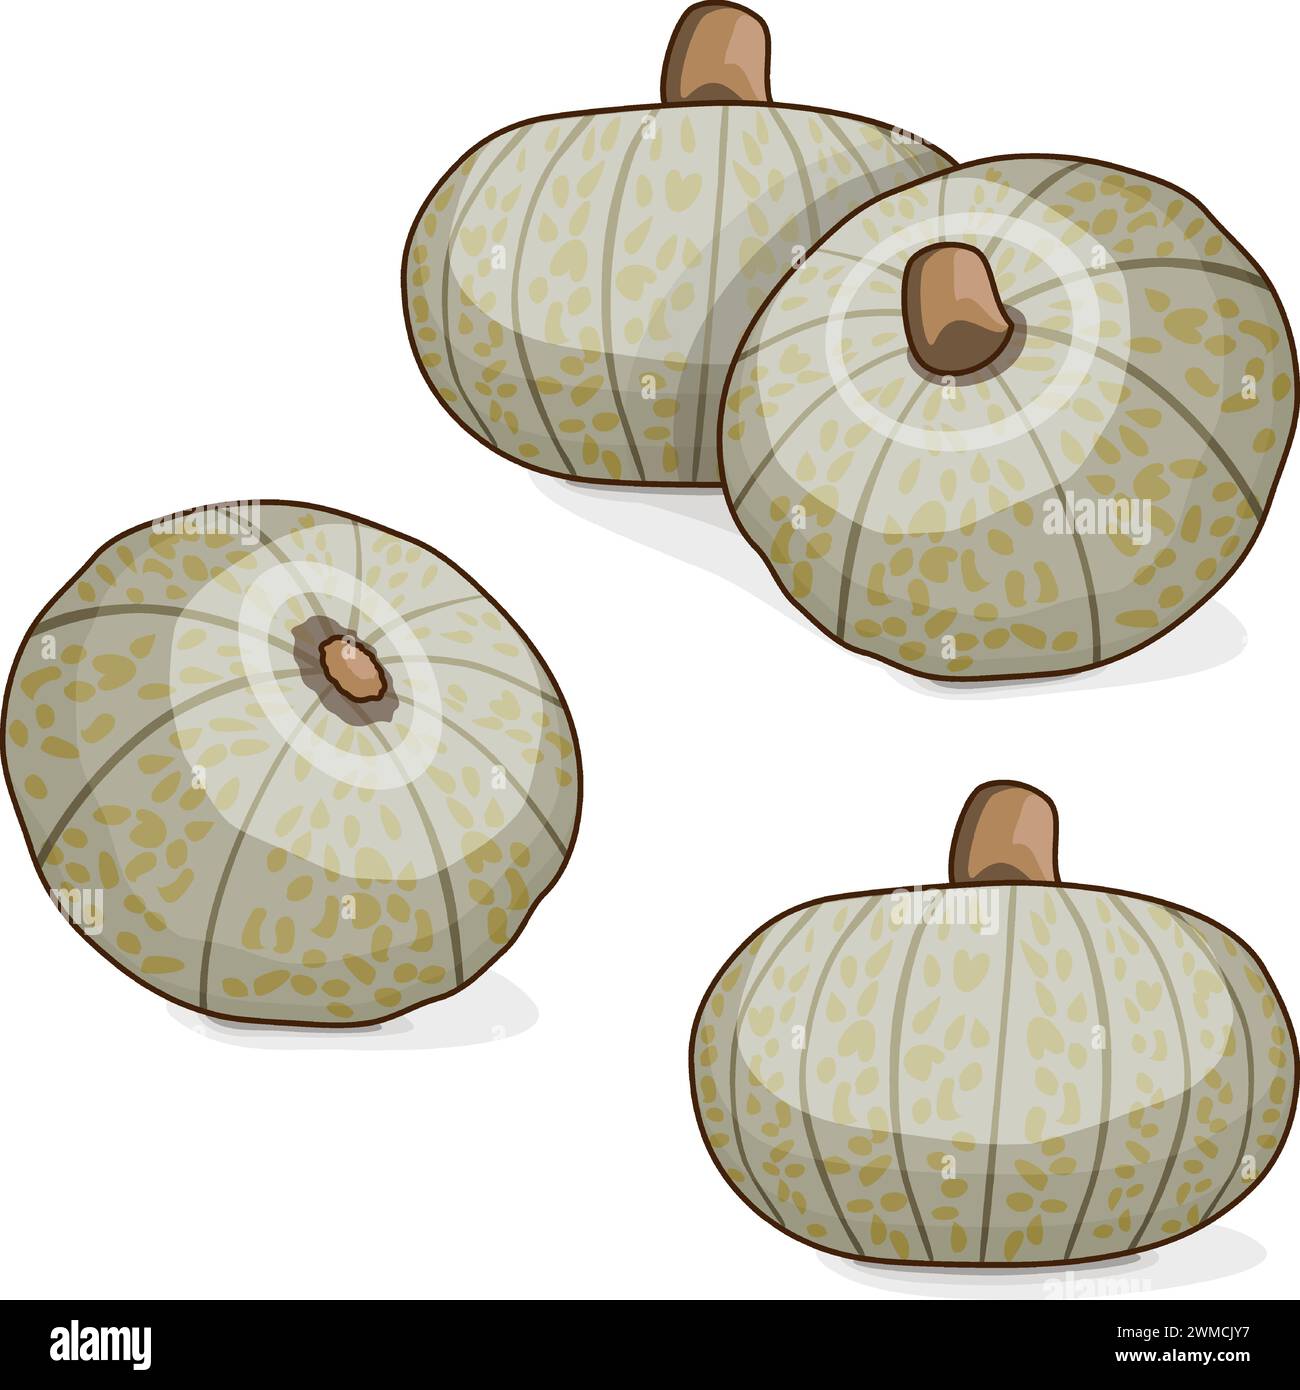 Group of Confection squash. Winter squash. Cucurbita maxima. Fruits and vegetables. Clipart. Isolated vector illustration. Stock Vector